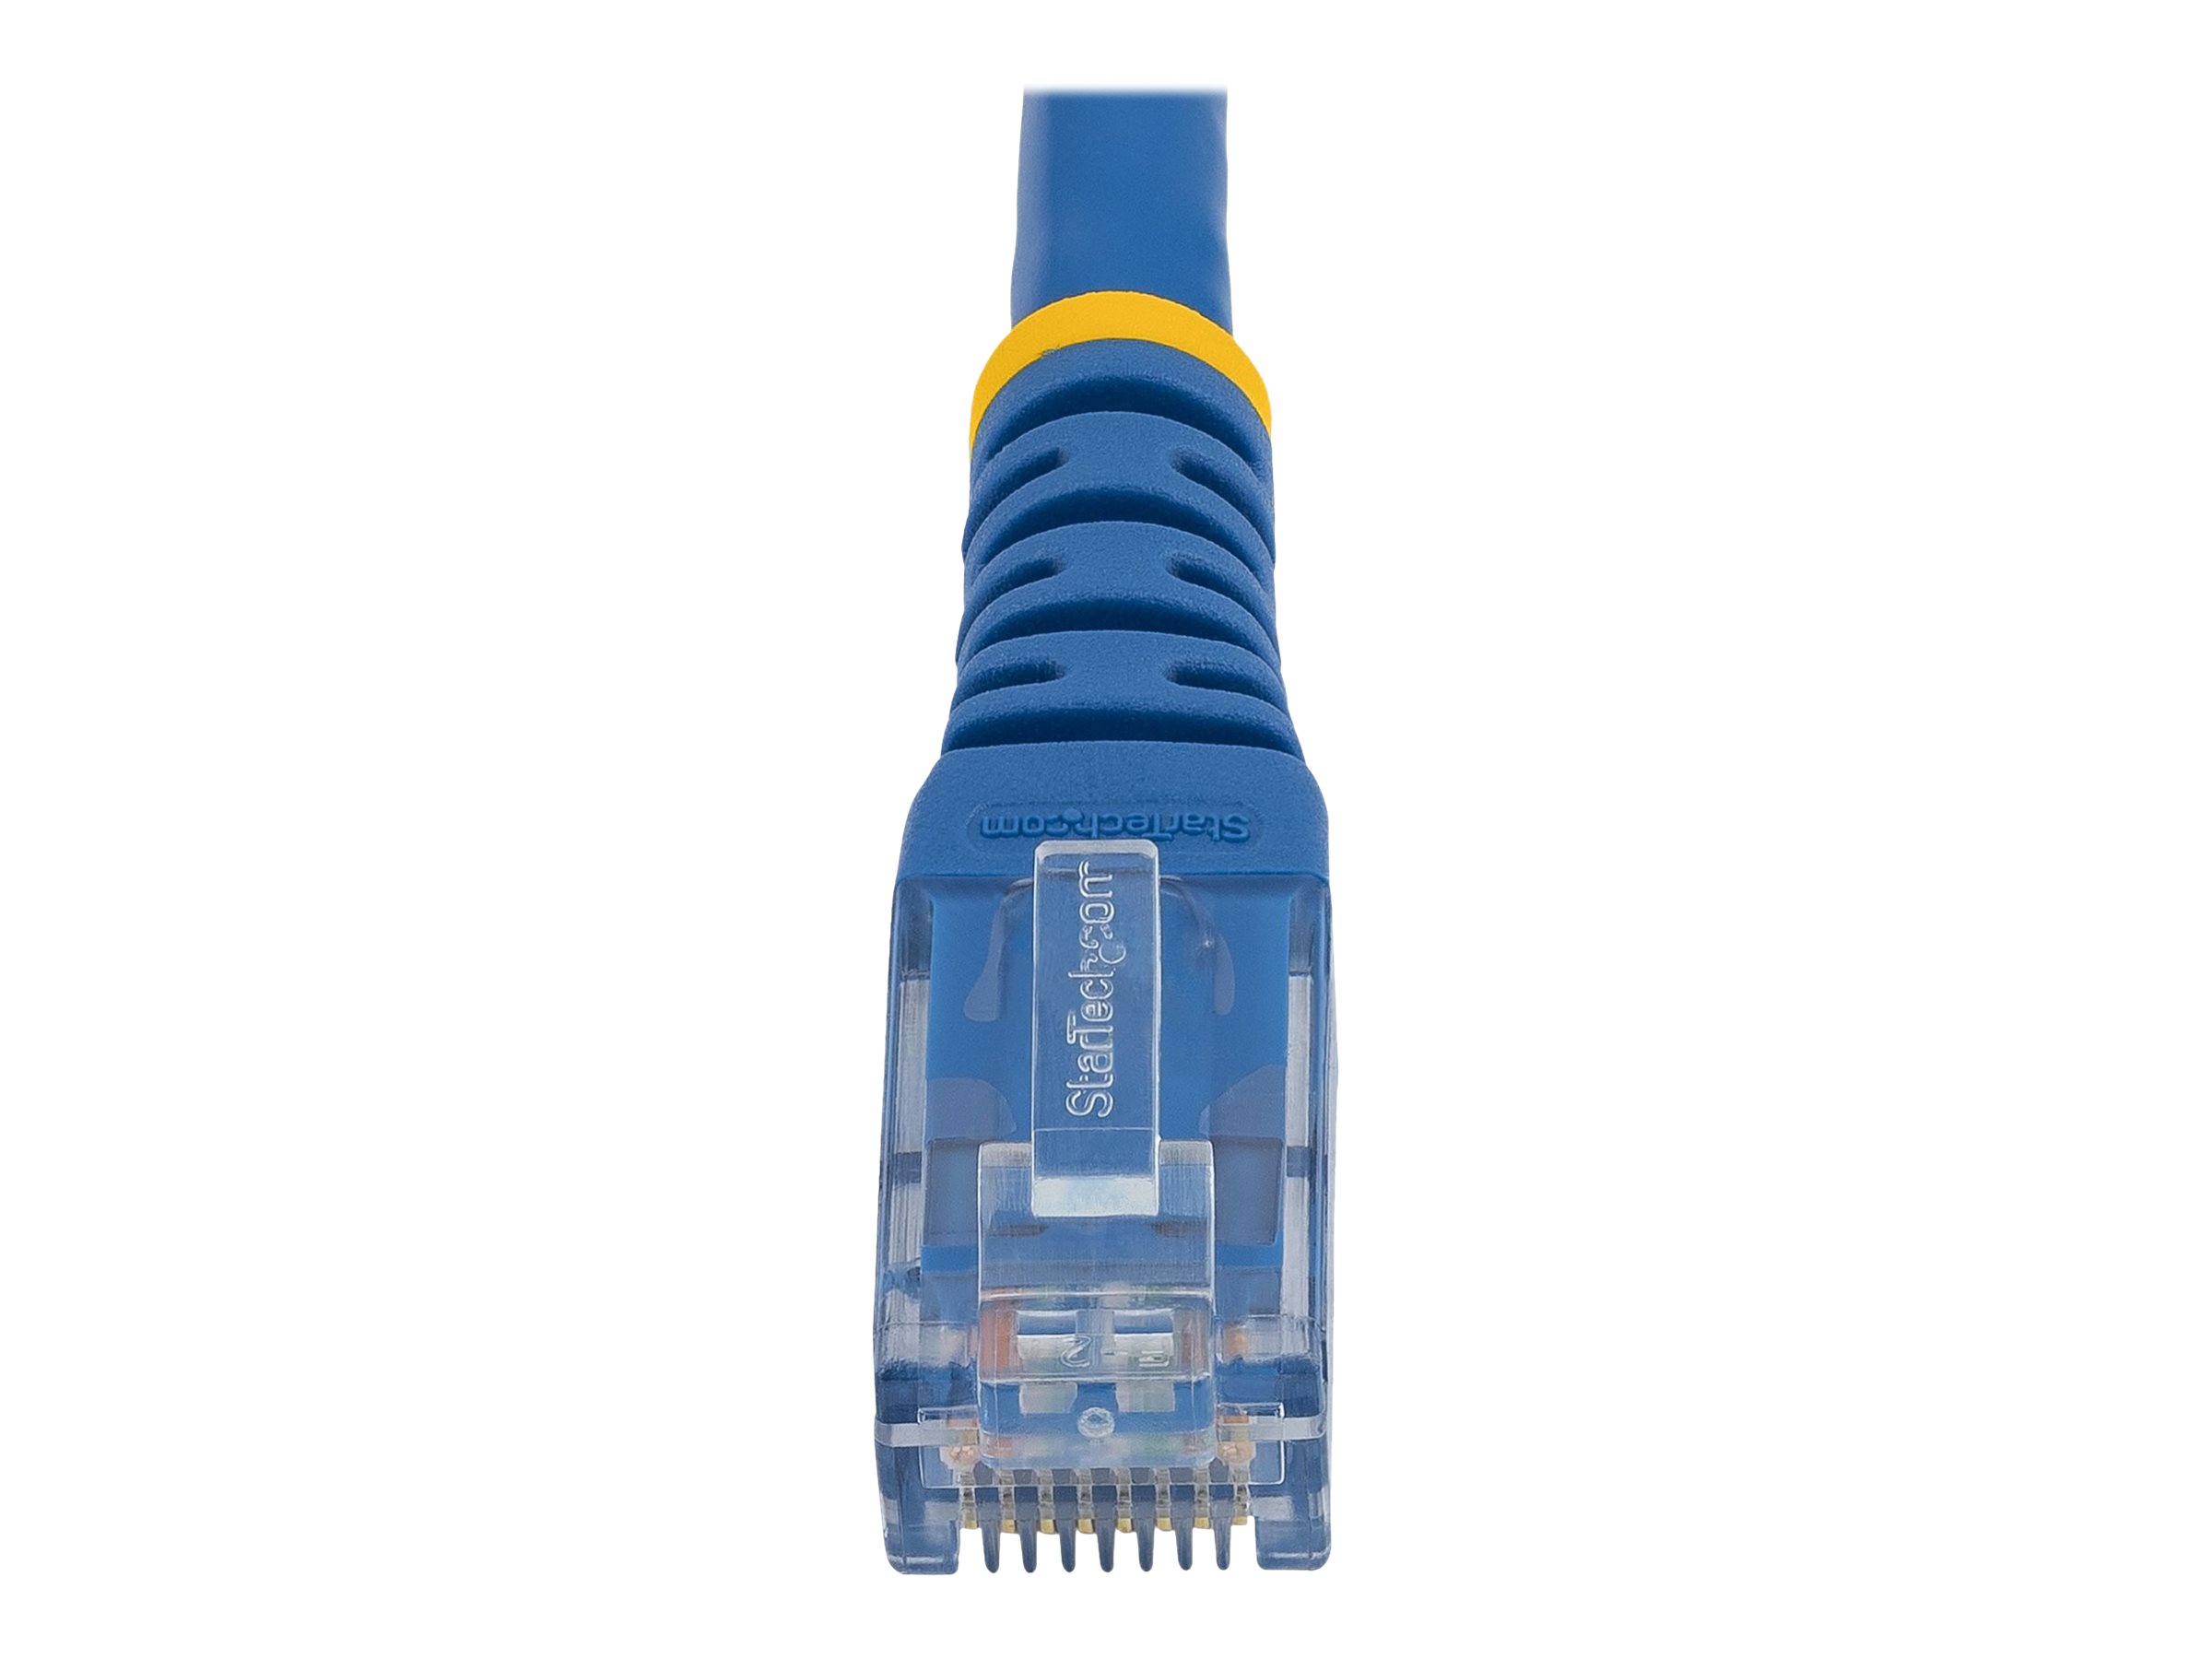 100ft CAT6 Ethernet Cable, 10 Gigabit Molded RJ45 650MHz 100W  PoE Patch Cord, CAT 10GbE UTP Network Cable with Strain Relief, Blue,  Fluke Tested/Wiring is UL Certified/TIA Category